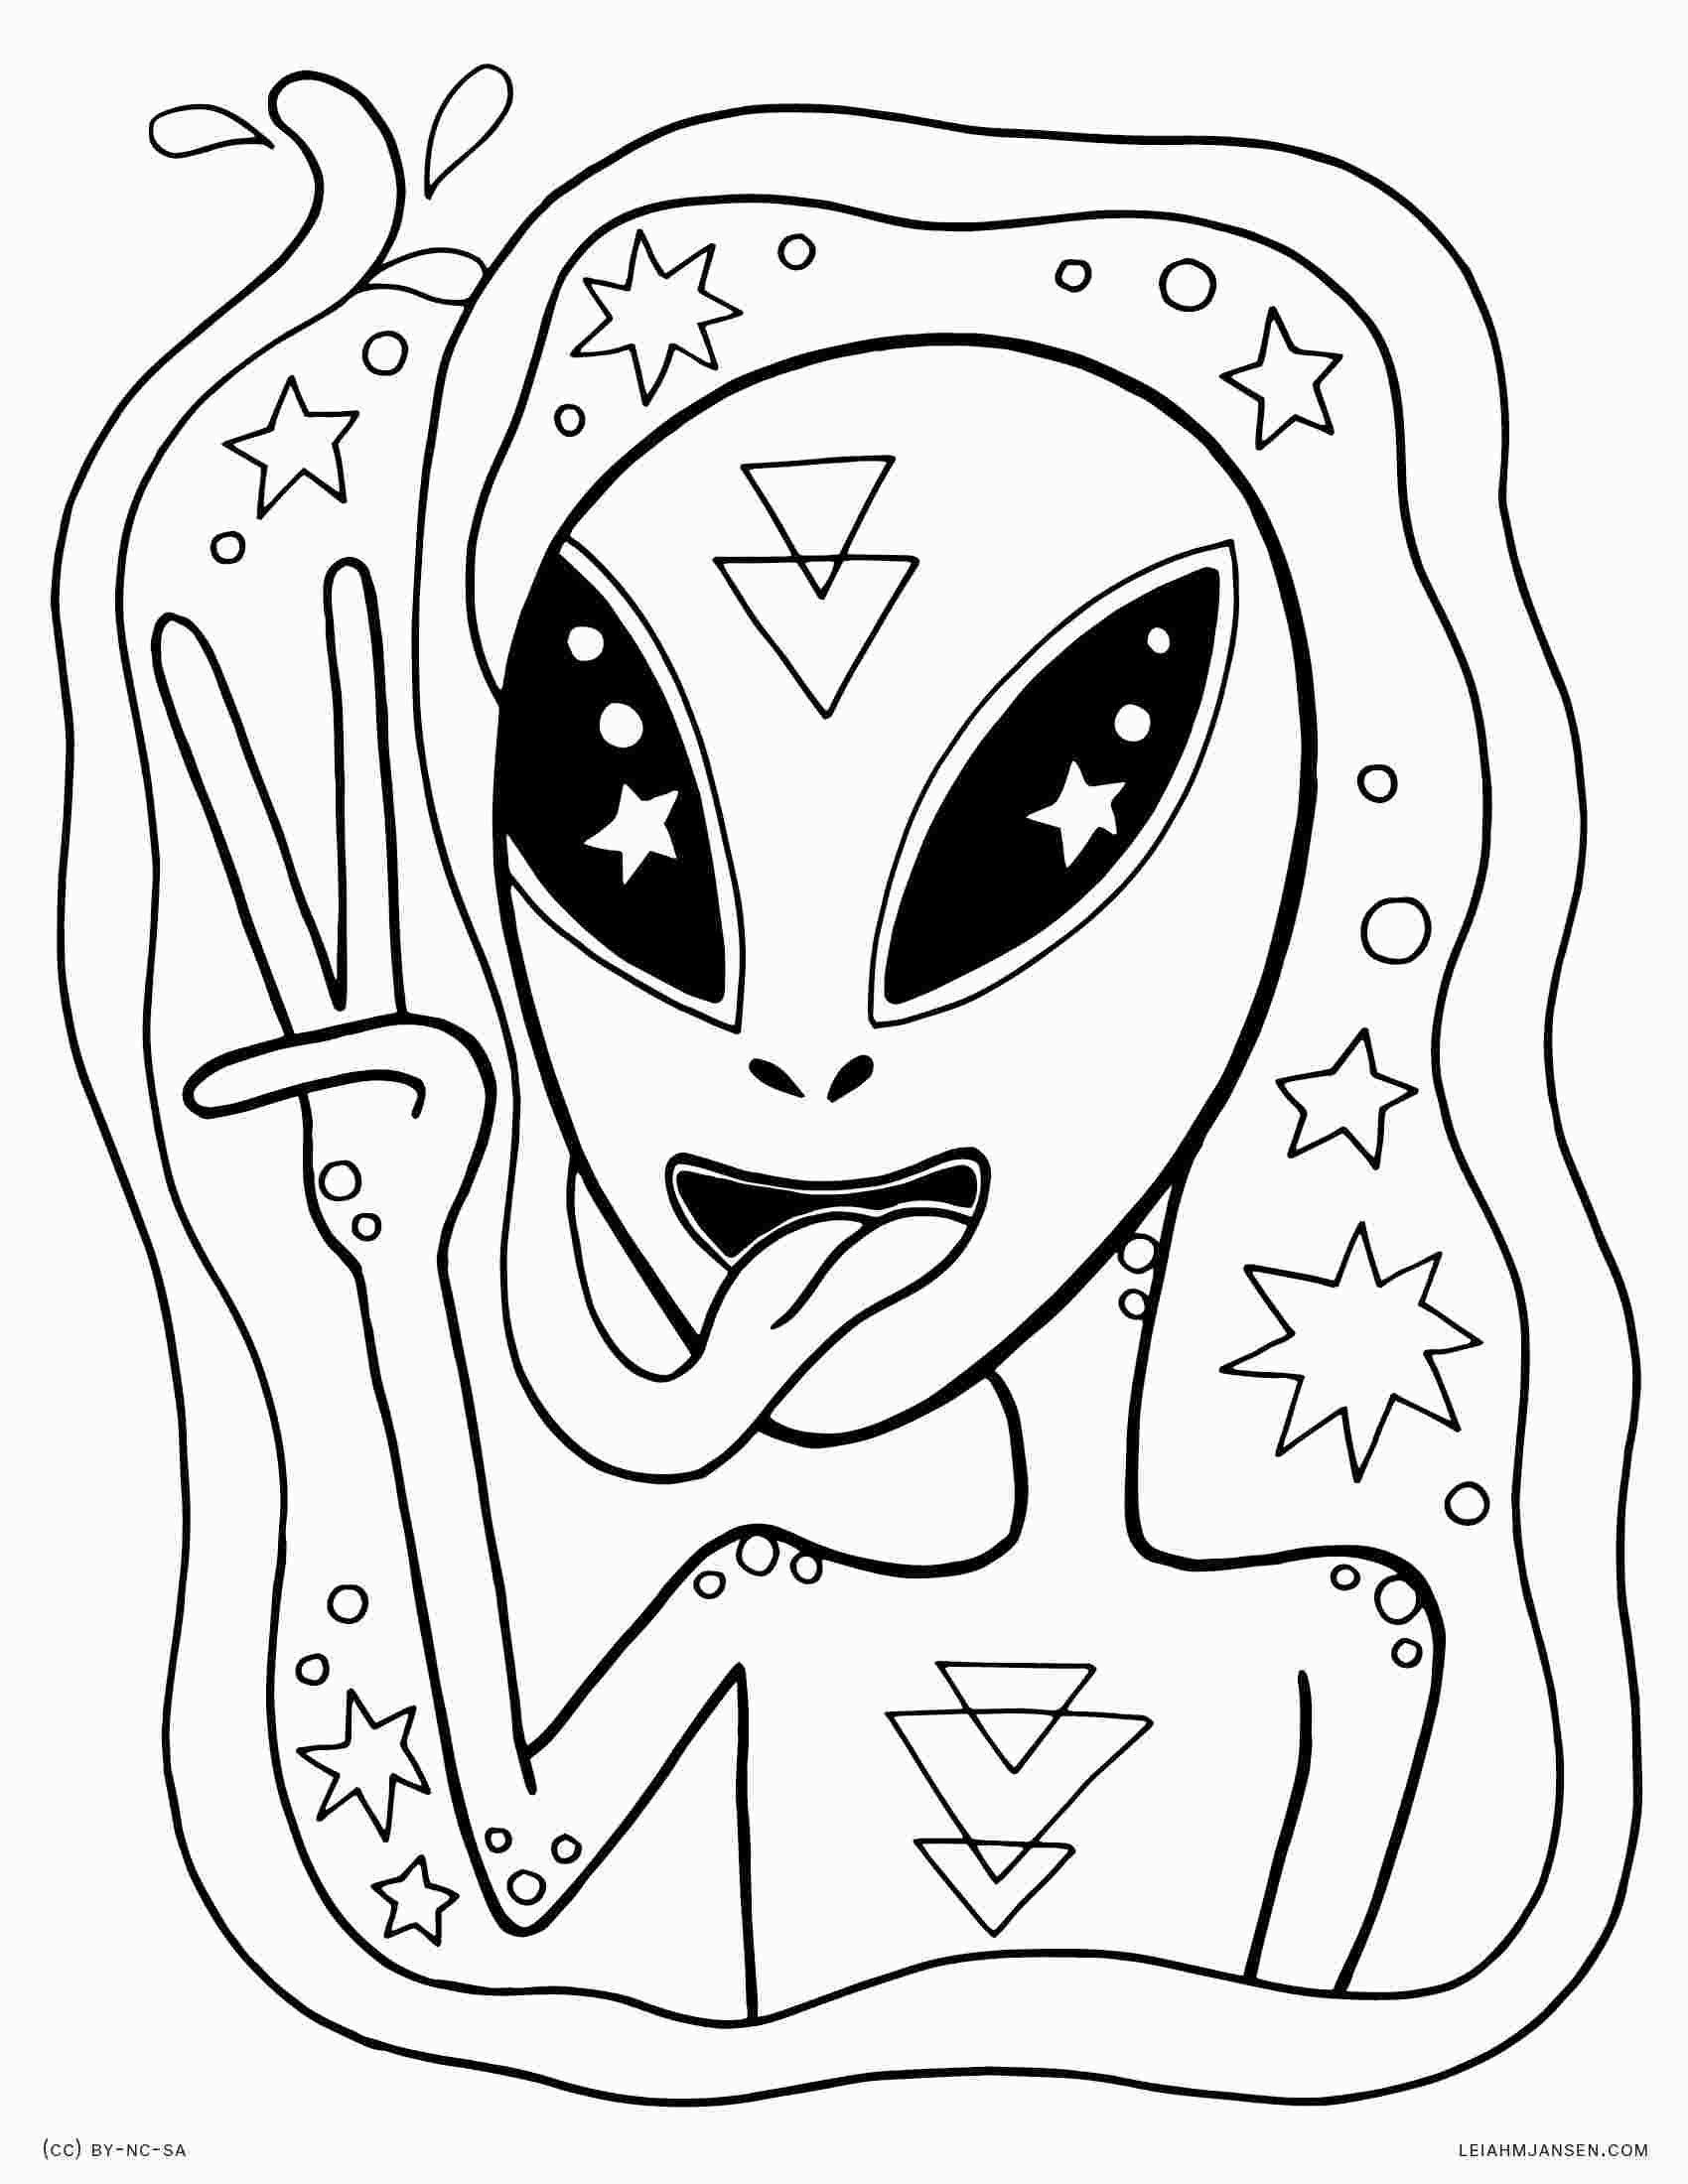 Trippy alien coloring pages space coloring pages coloring pages inspirational cute coloring pages